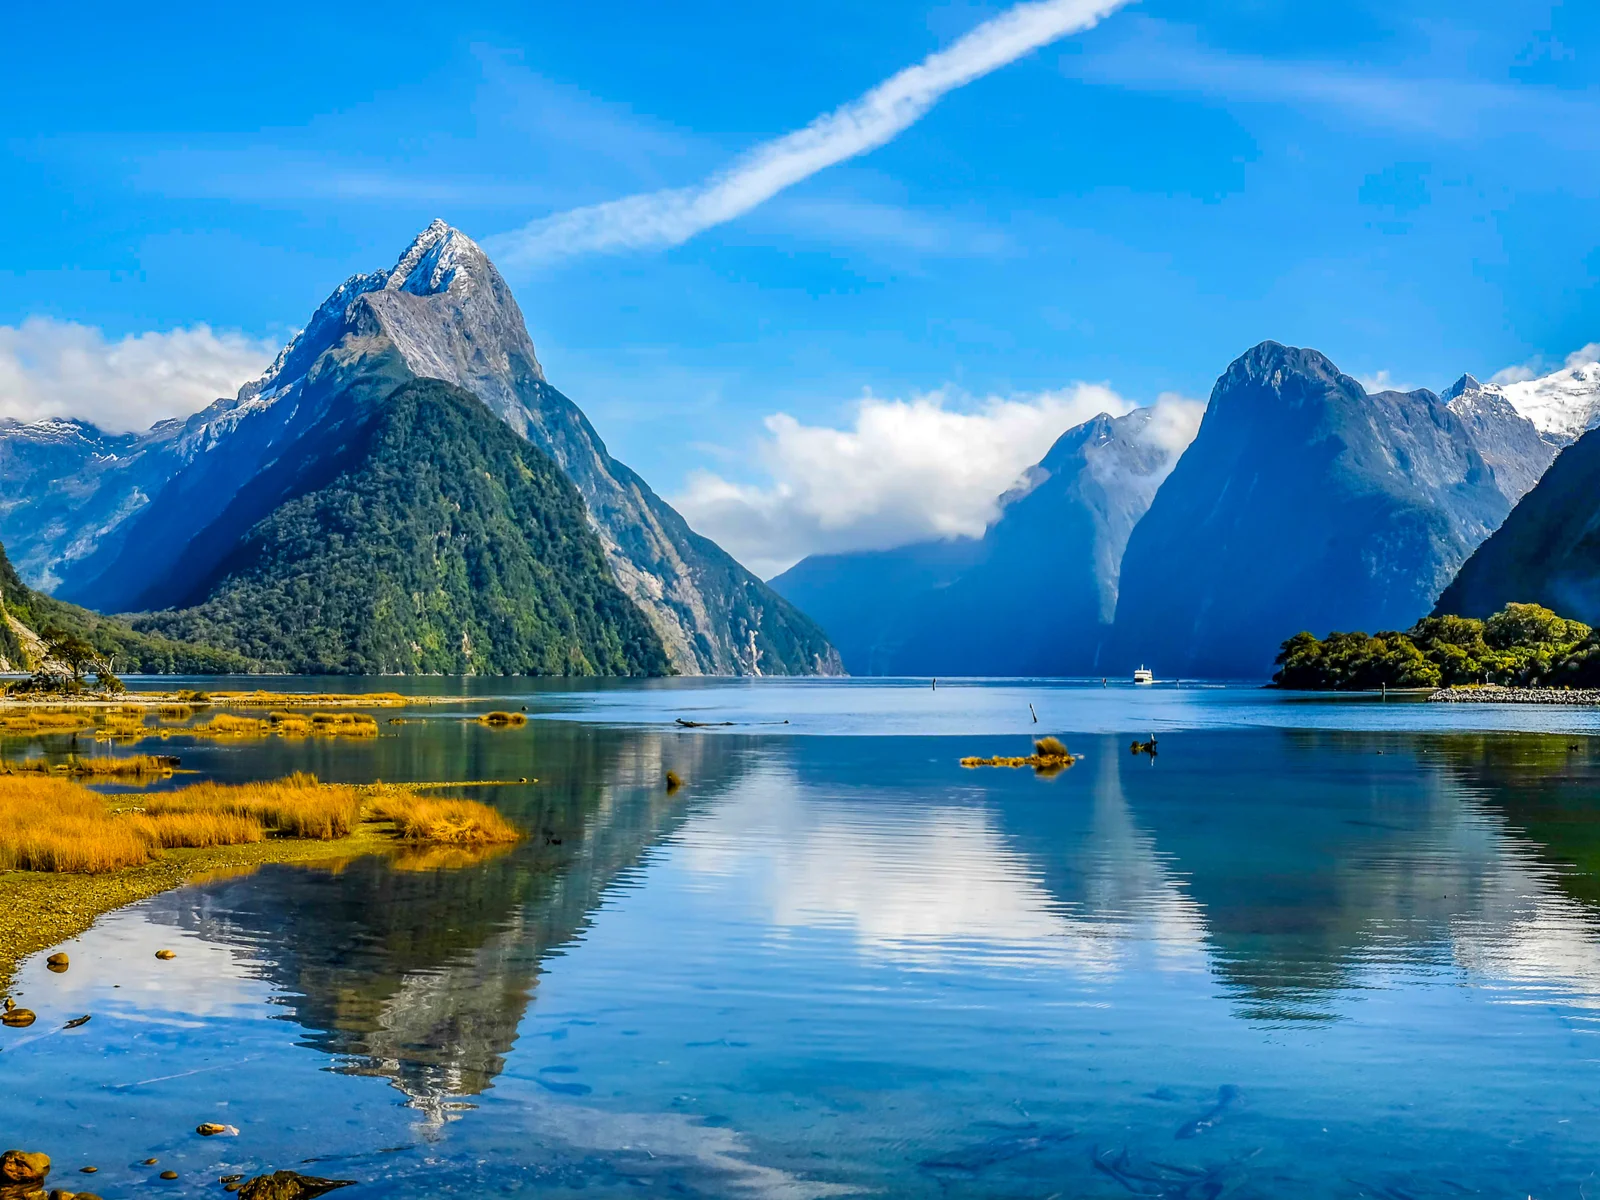 A dreamy Lord of the Rings filming locations, nearly still clear waters and tall snowy peak mountains of Fjordland National Park